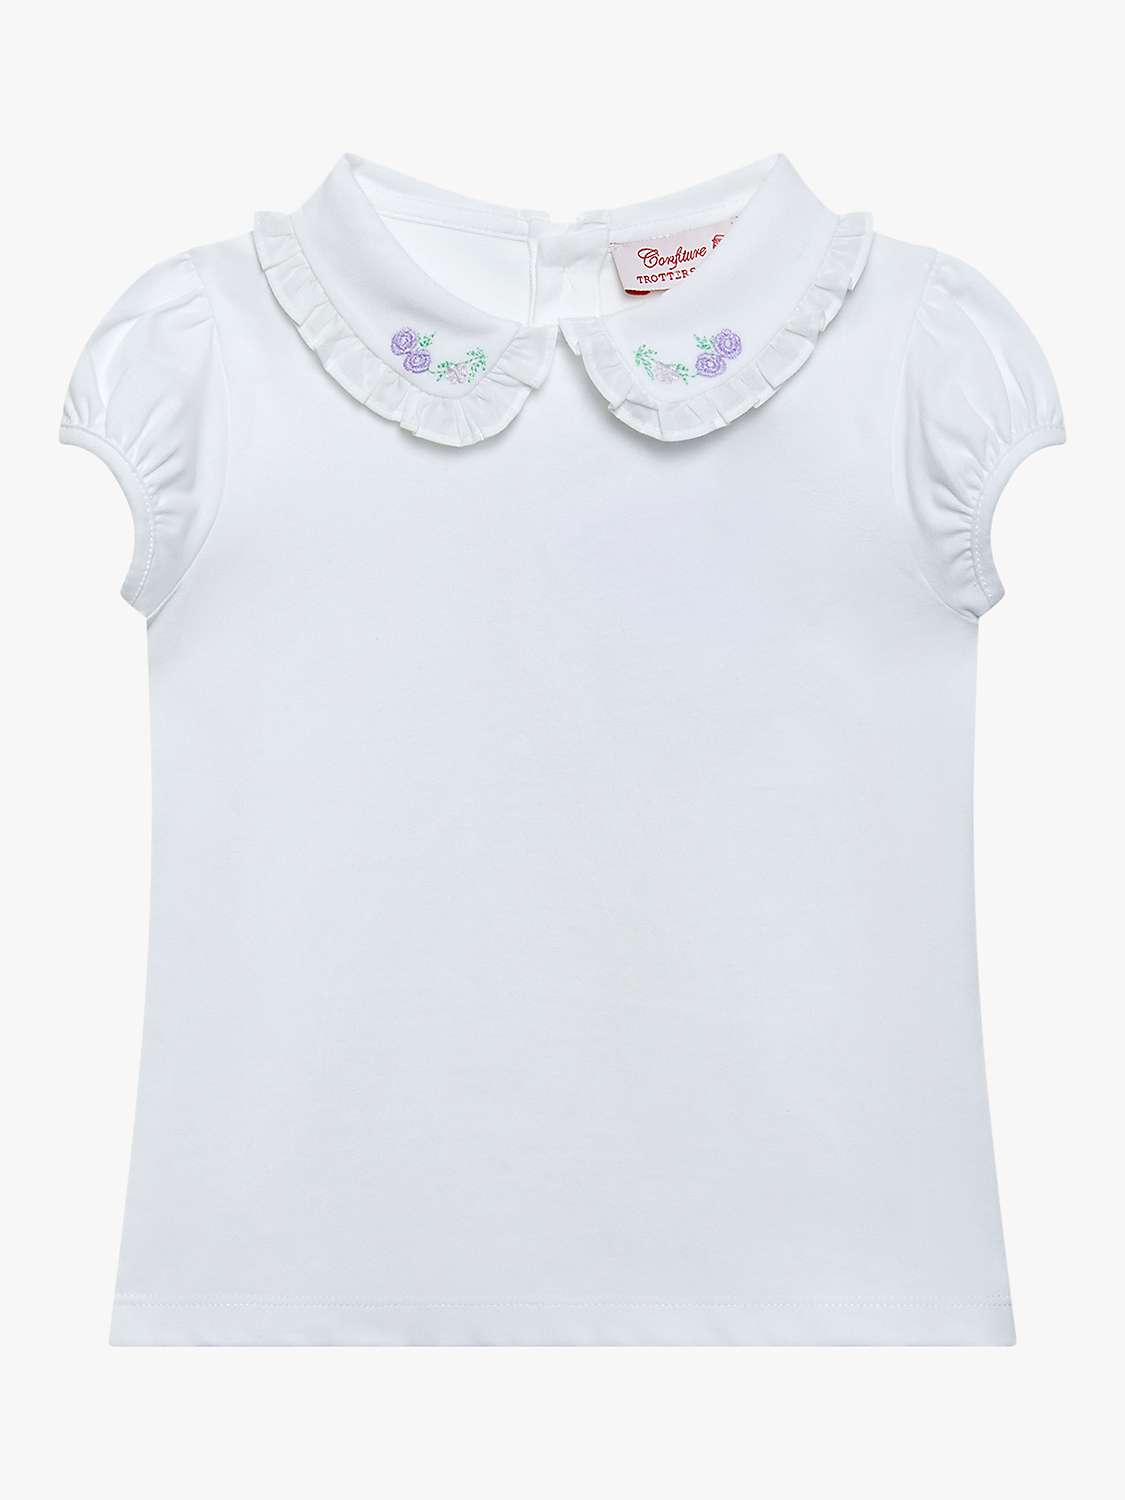 Buy Trotters Kids' Floral Embroidered Peter Pan Collar Jersey Top, White/Lilac Online at johnlewis.com